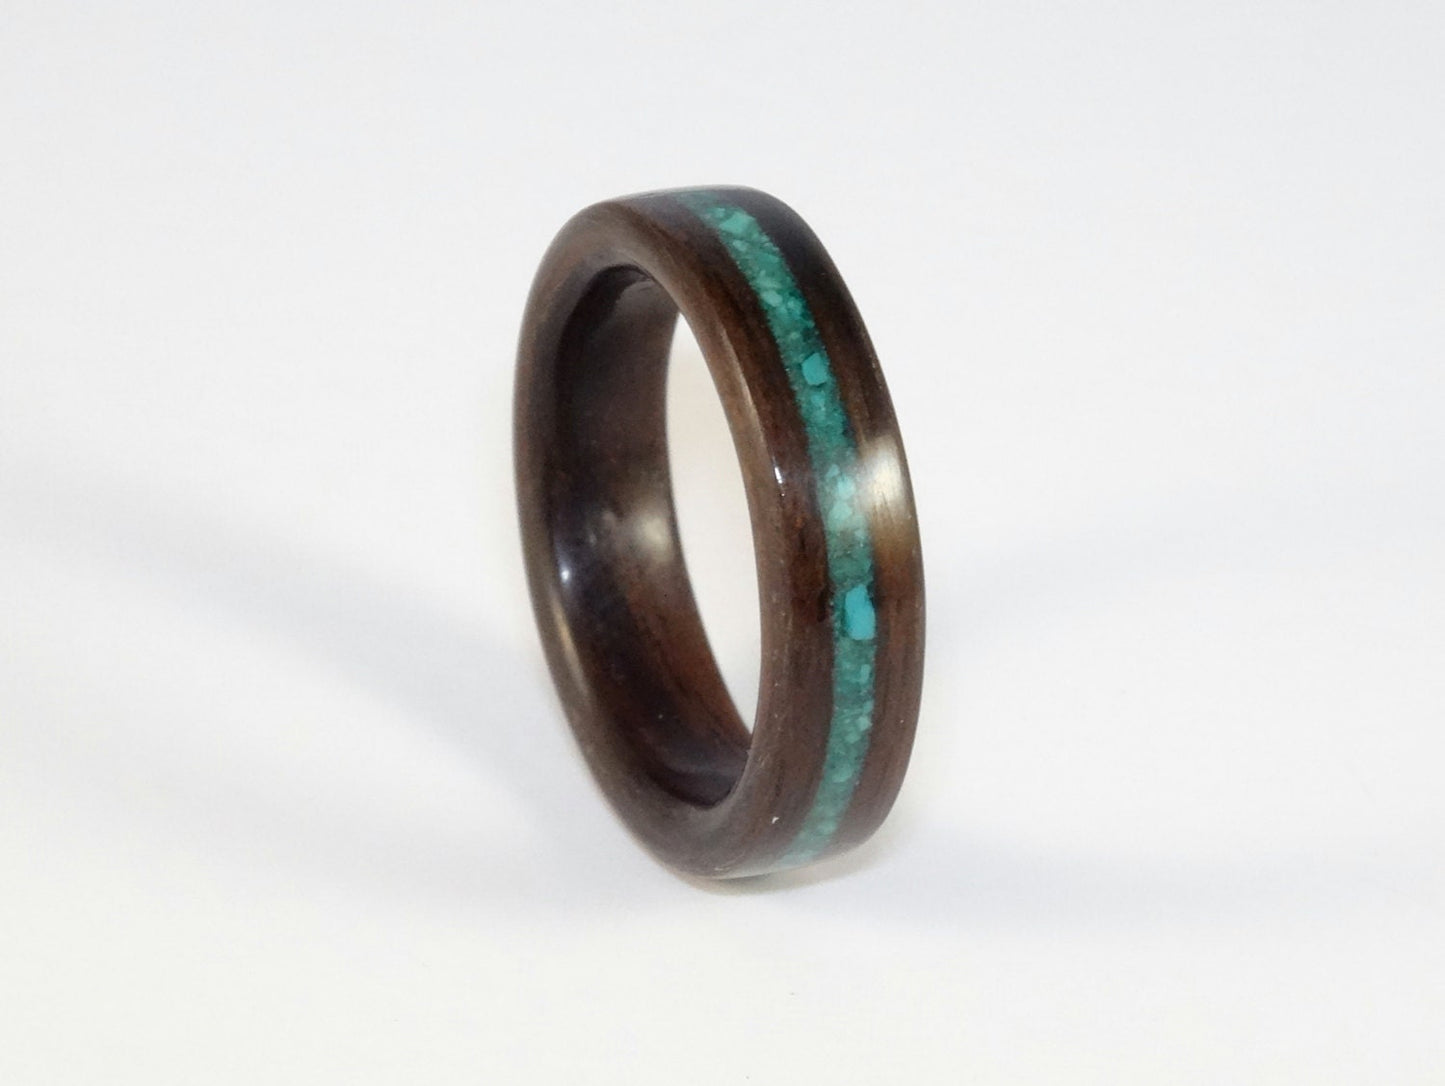 Ebony with a Turquoise Bent Wood Ring